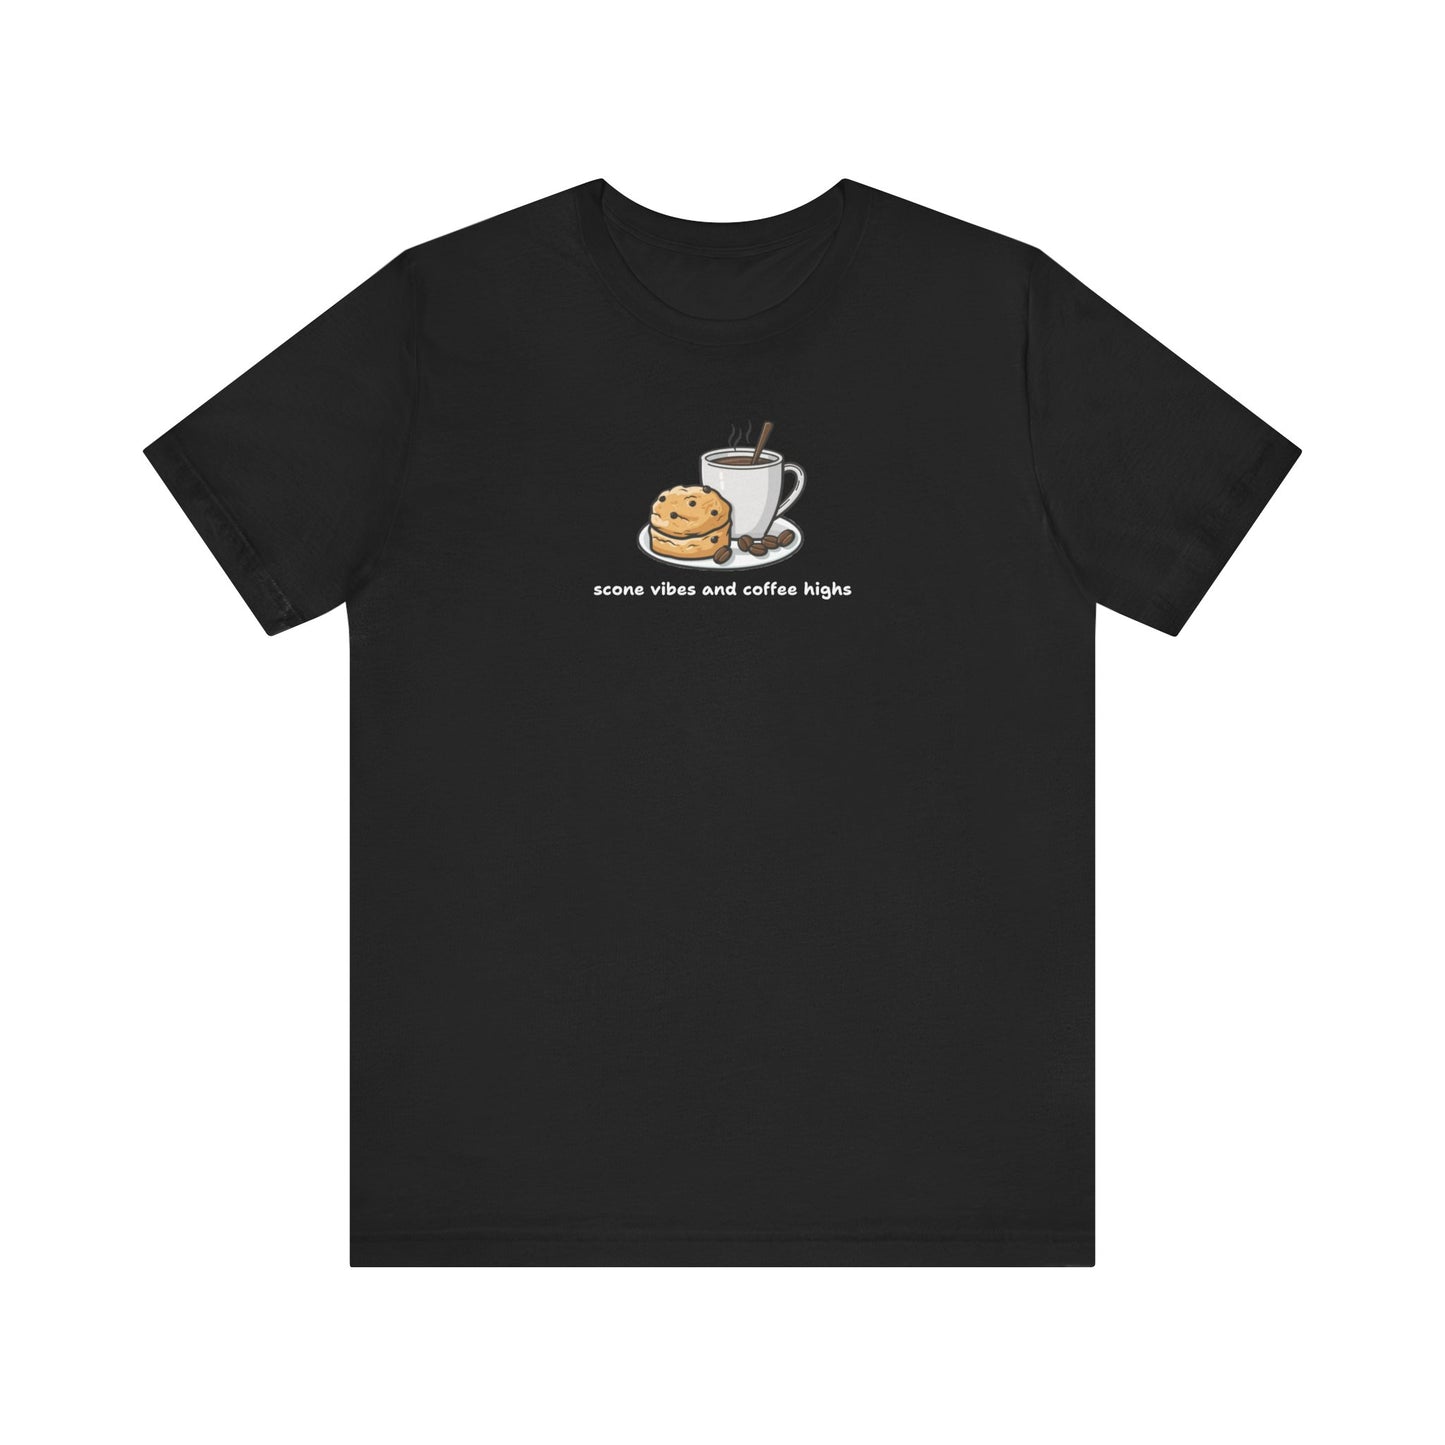 Scone Vibes and Coffee Highs T-Shirt